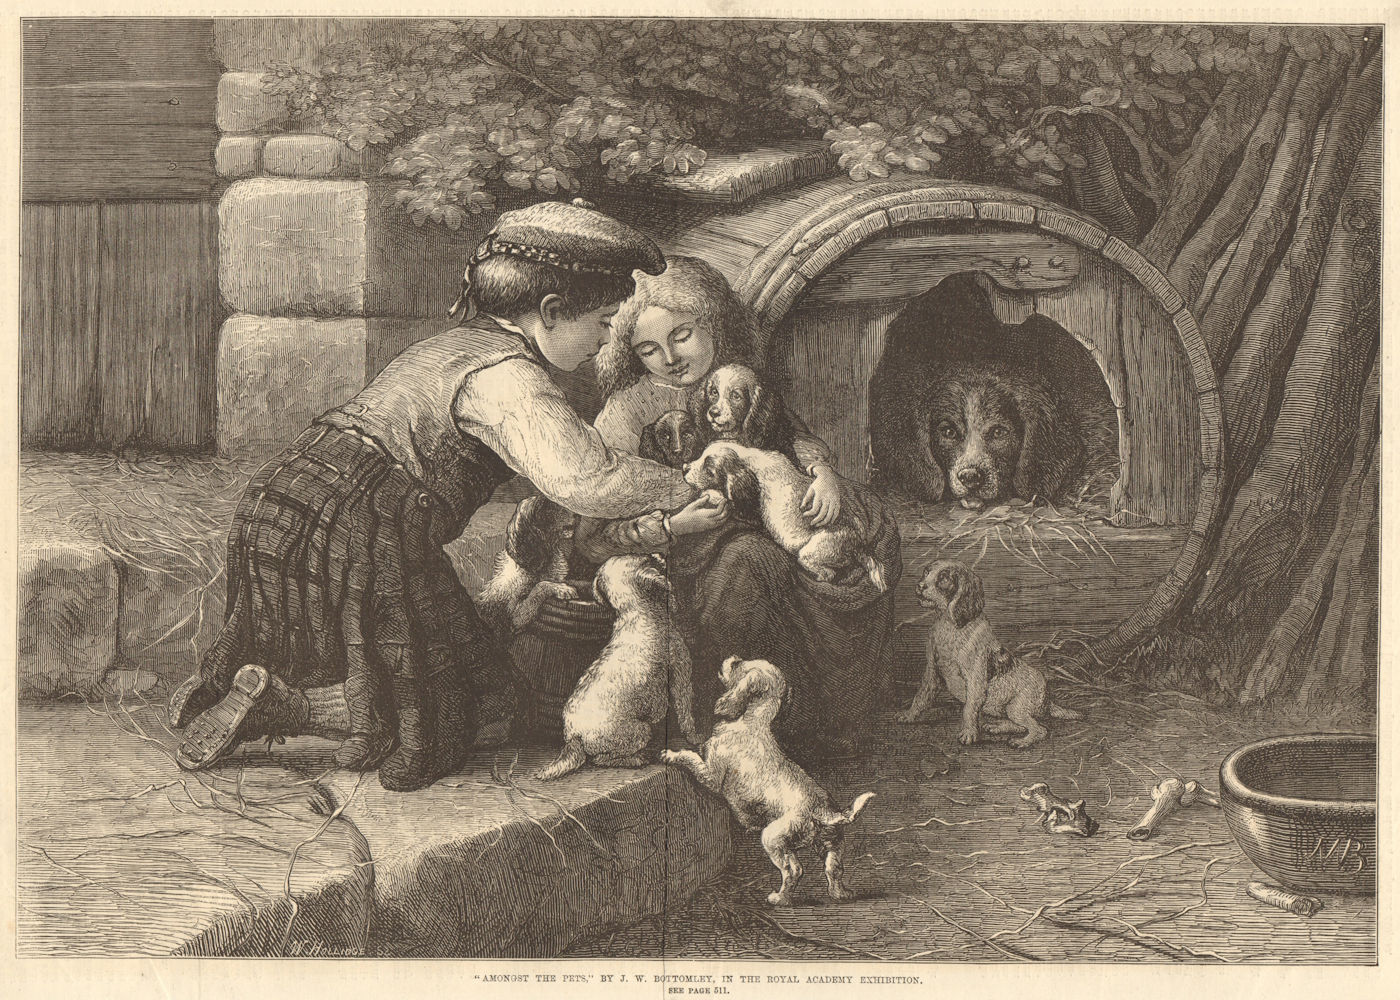 Associate Product "Amongst the pets", by J. W. Bottomley. Puppies Family Dogs 1870 old print